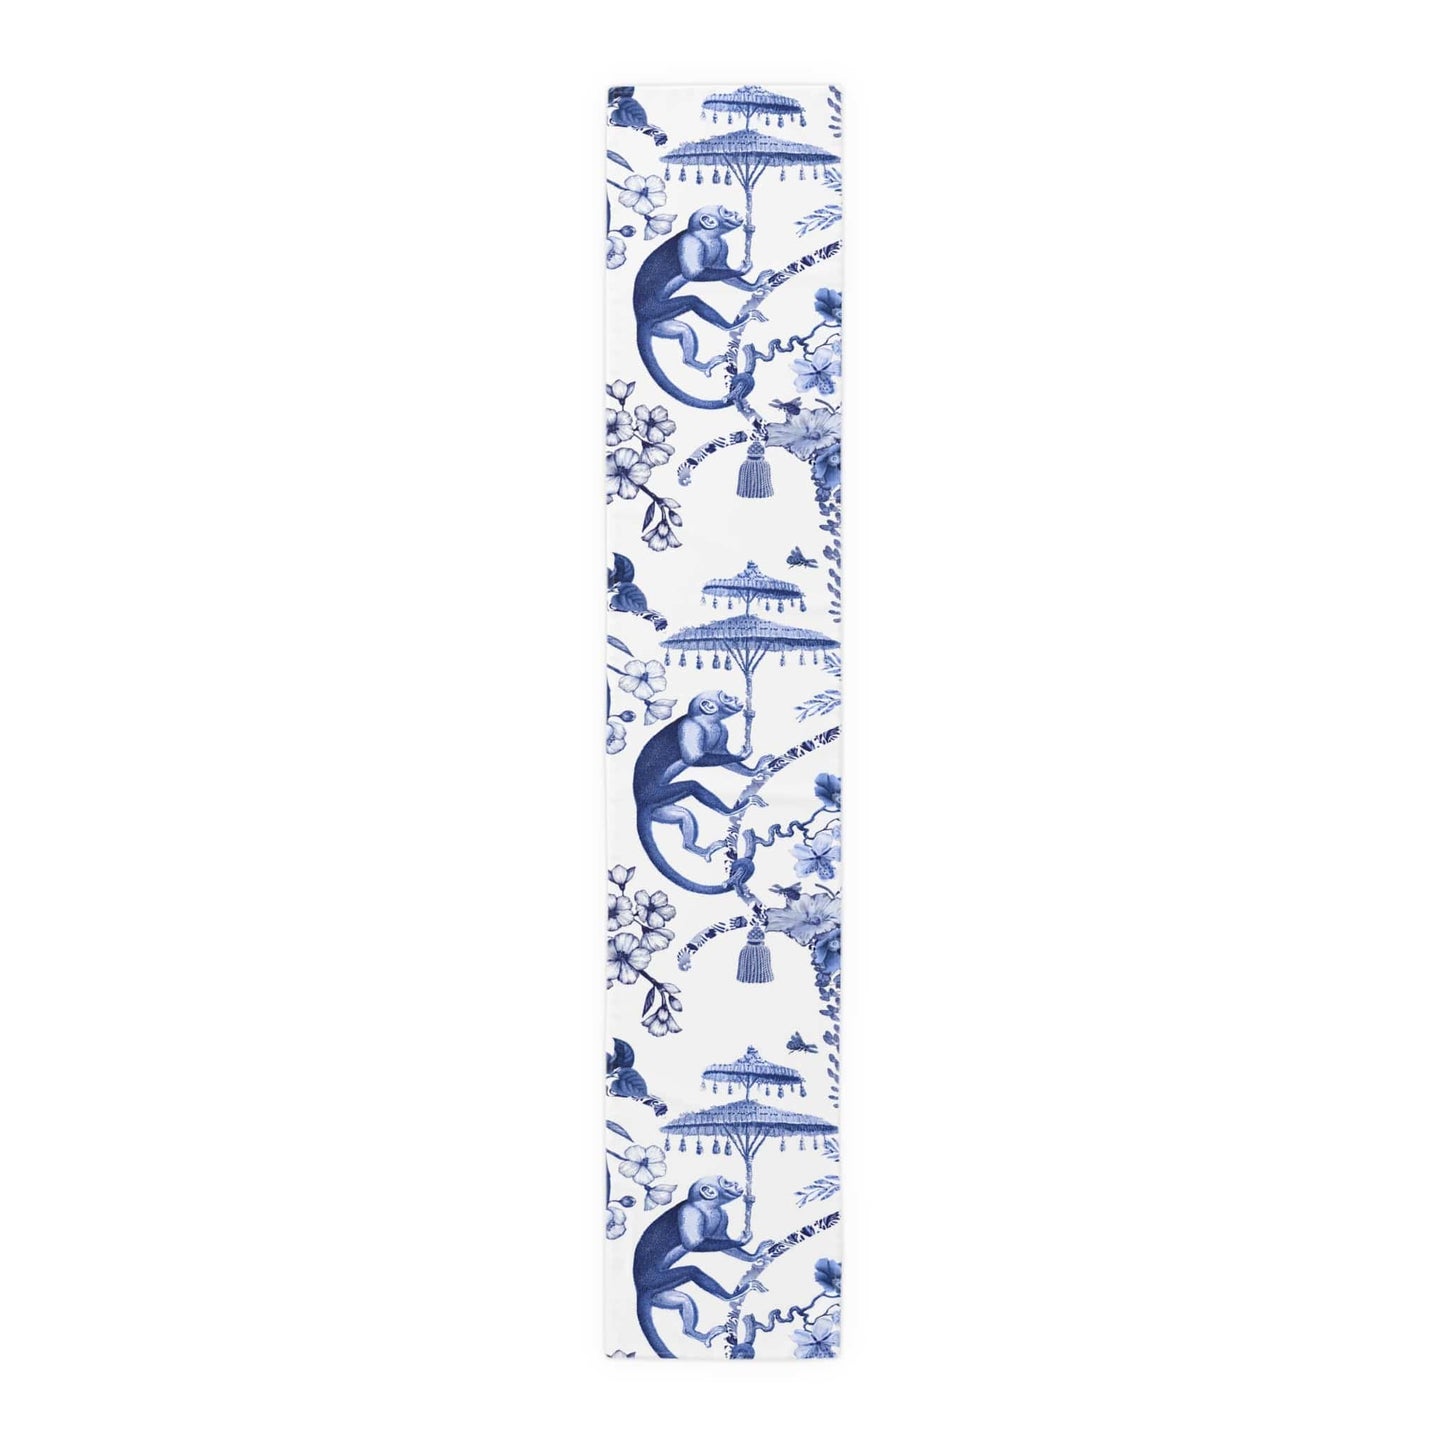 Printify Chinoiserie Botanical Toile Table Runner, Floral Blue, White Chinoiserie Jungle, Country Farmhouse Grandmillenial Table Decor Home Decor